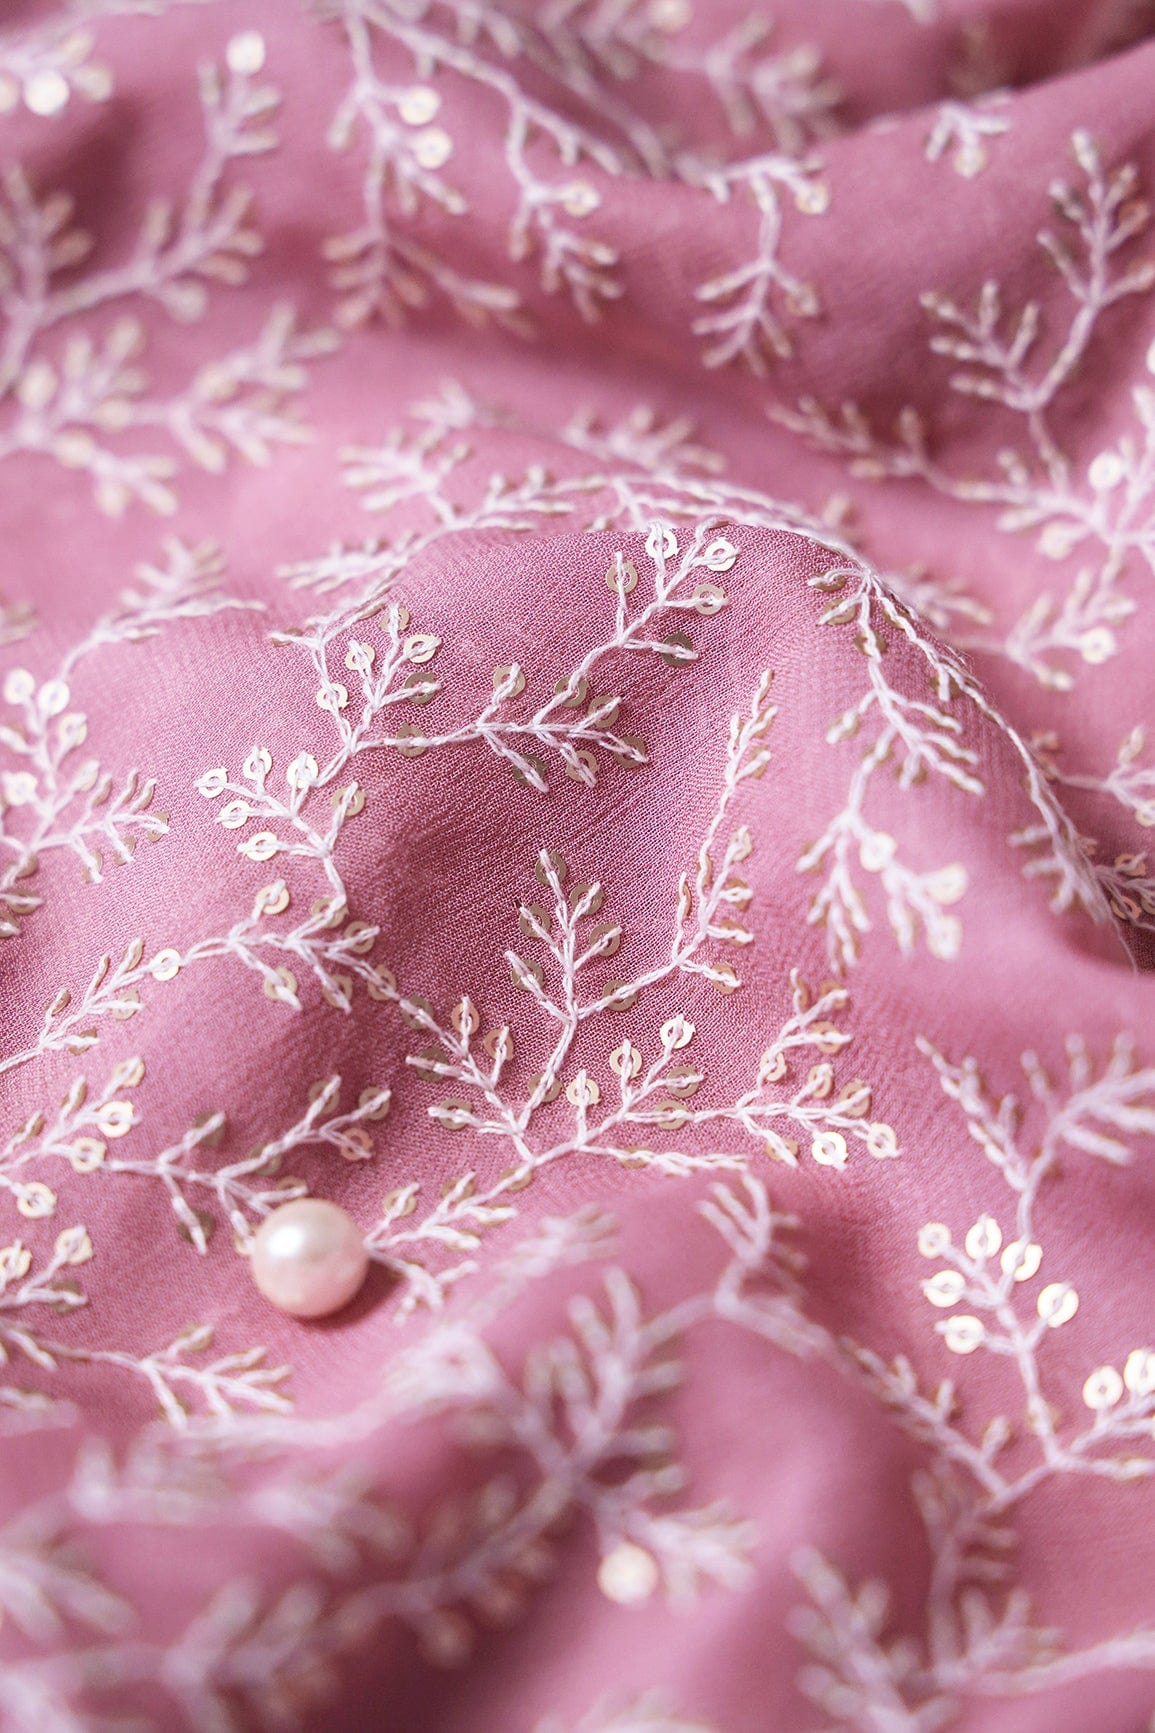 doeraa Plain Fabrics White Thread With Gold Sequins Leafy Embroidery Work On Thulian Pink Viscose Georgette Fabric